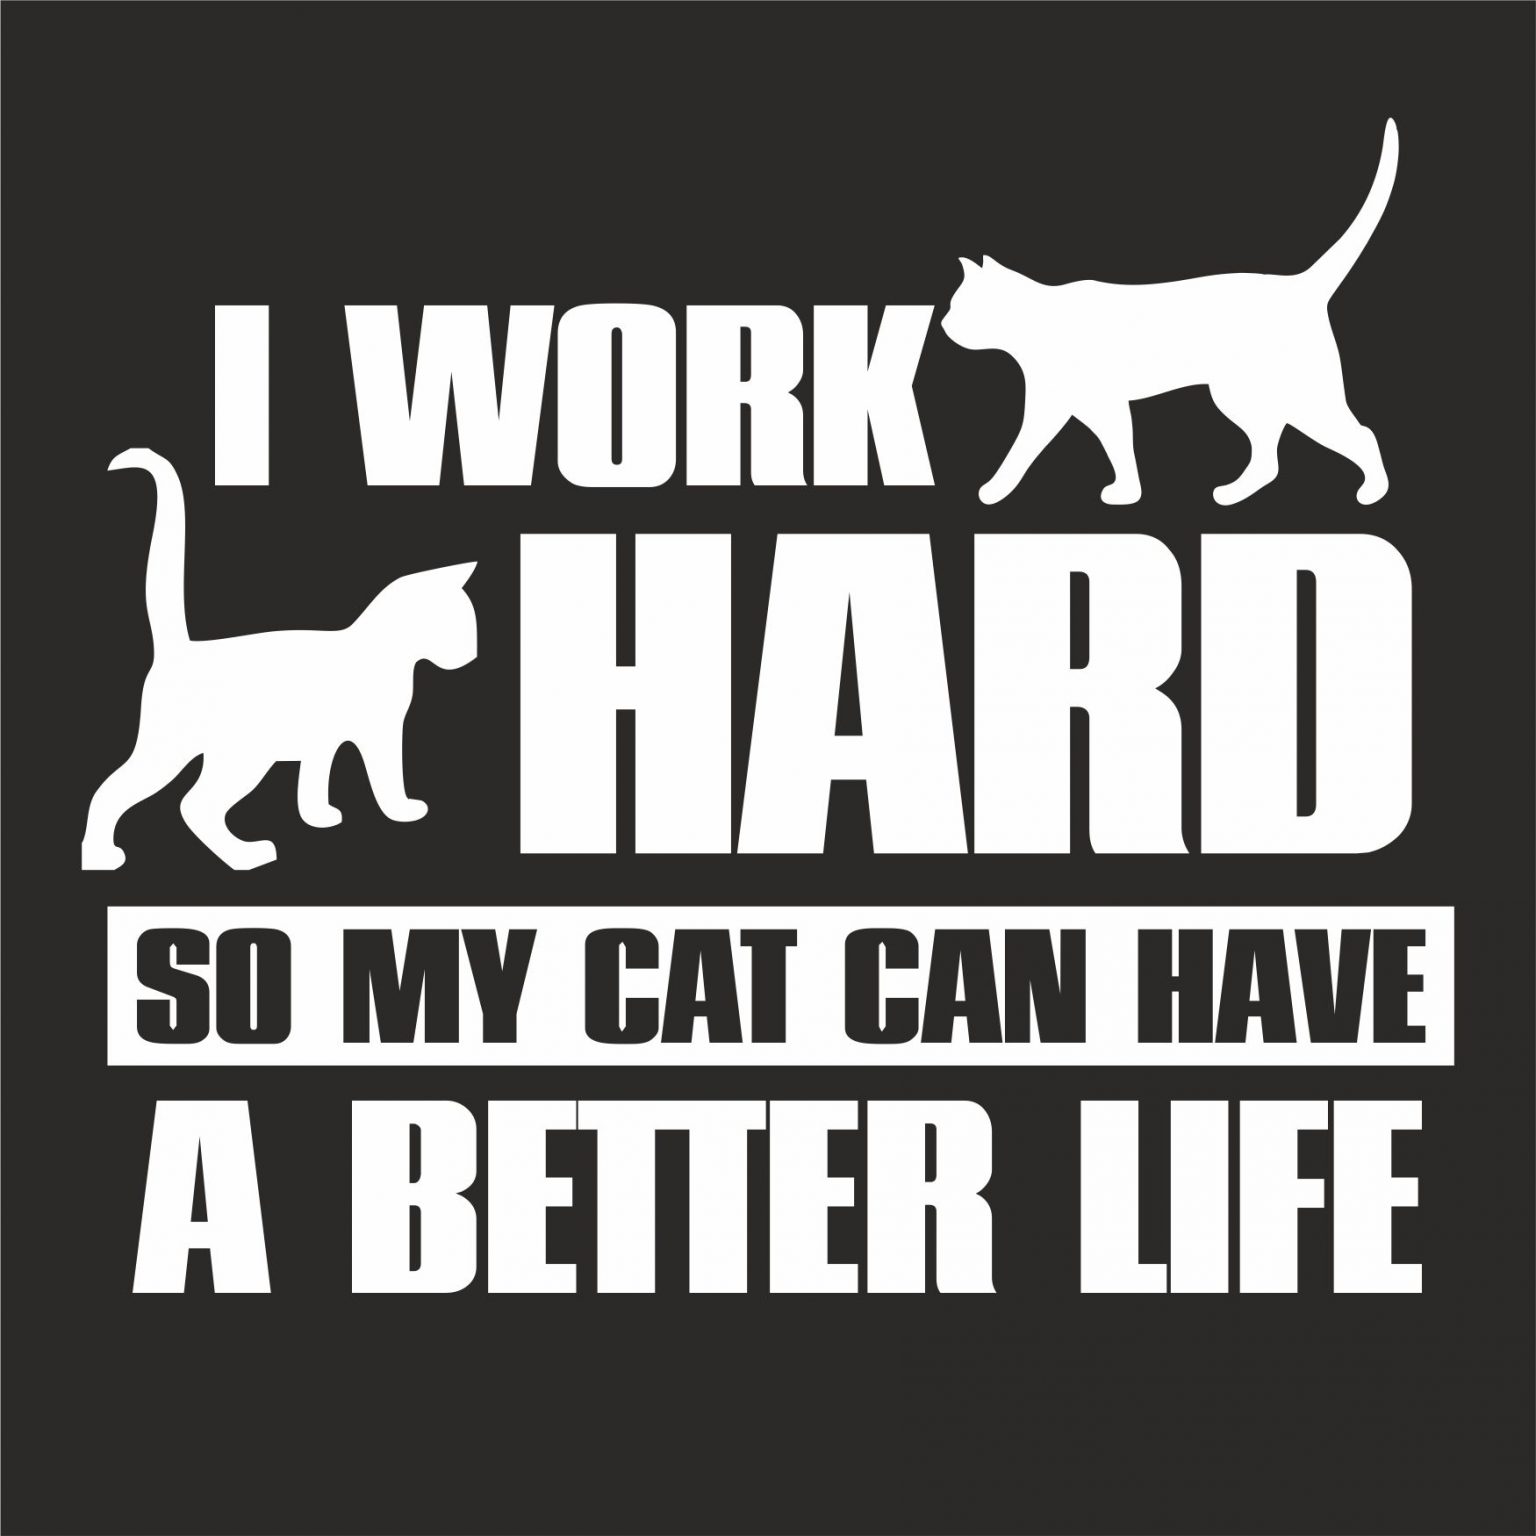 I WORK HARD SO MY CAT CAN HAVE A BETTER LIFE T-SHIRT - GeekyTees